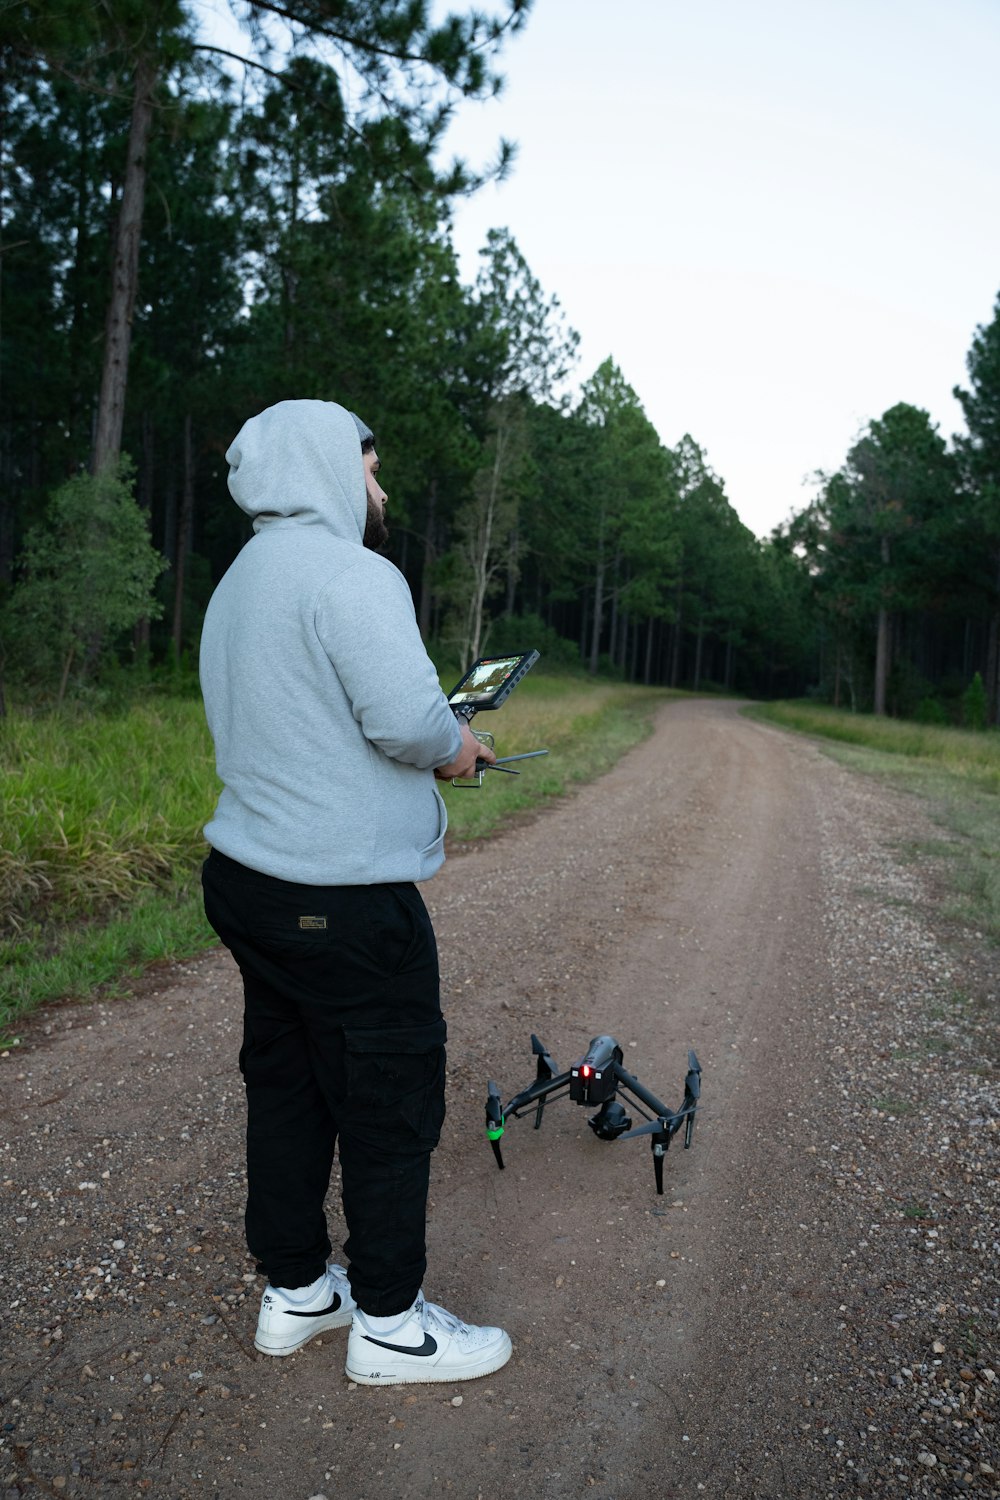 a man standing on a dirt road holding a remote control helicopter